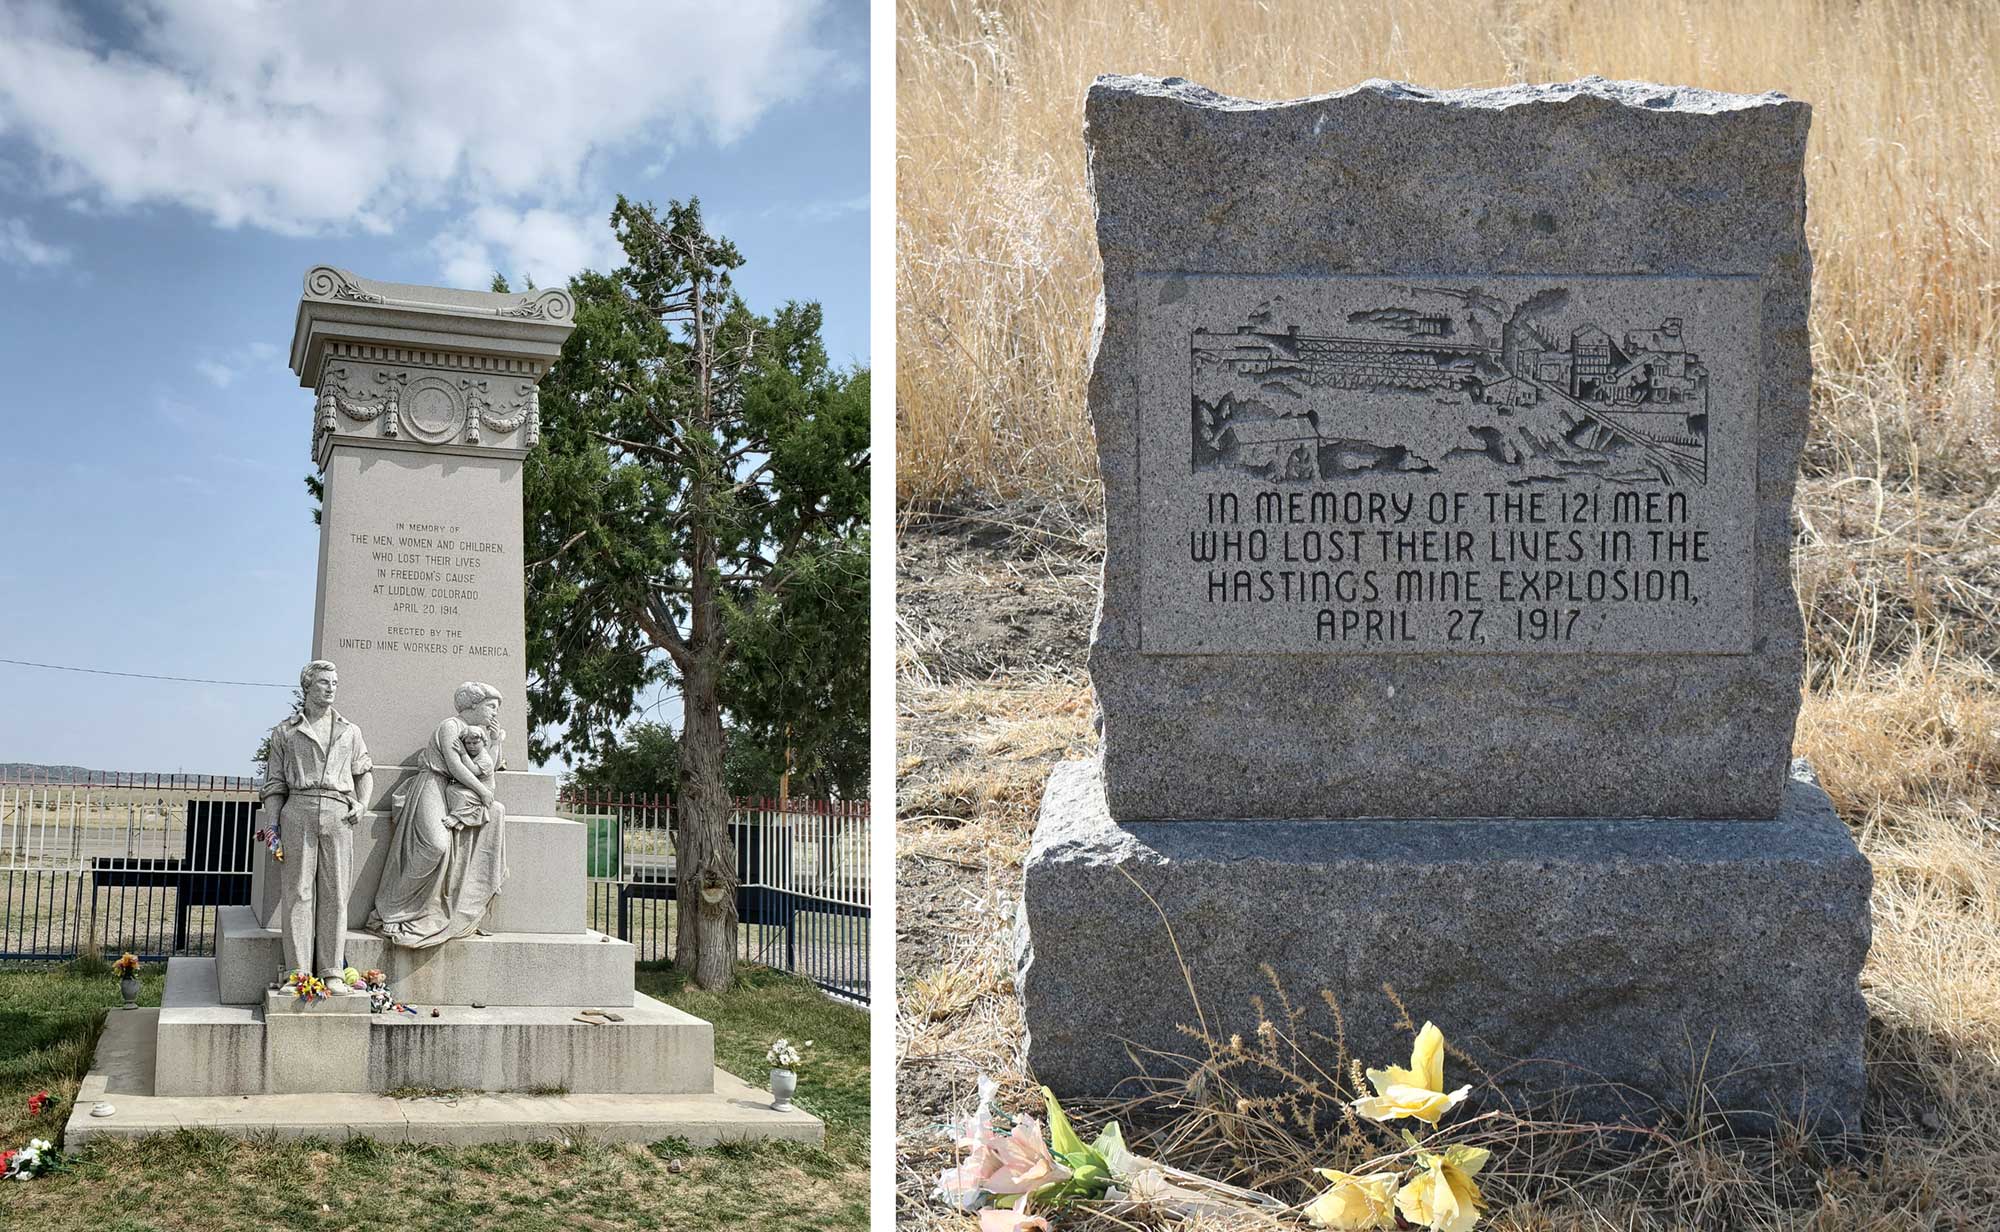 2-Panel image showing photos of monuments near Trinidad, Colorado. Panel 1: Monument to the victims of the Ludlow Massacre. The monument is a square column made out of light gray stone. In front, a man stands next to a women who leans again the column holding a child. Panel 2: Stone monument commemorating the Hastings Mine Explosion. It says "In memory of the 121 men who lost their lives in the Hastings Mine Explosion, April 27, 1917."